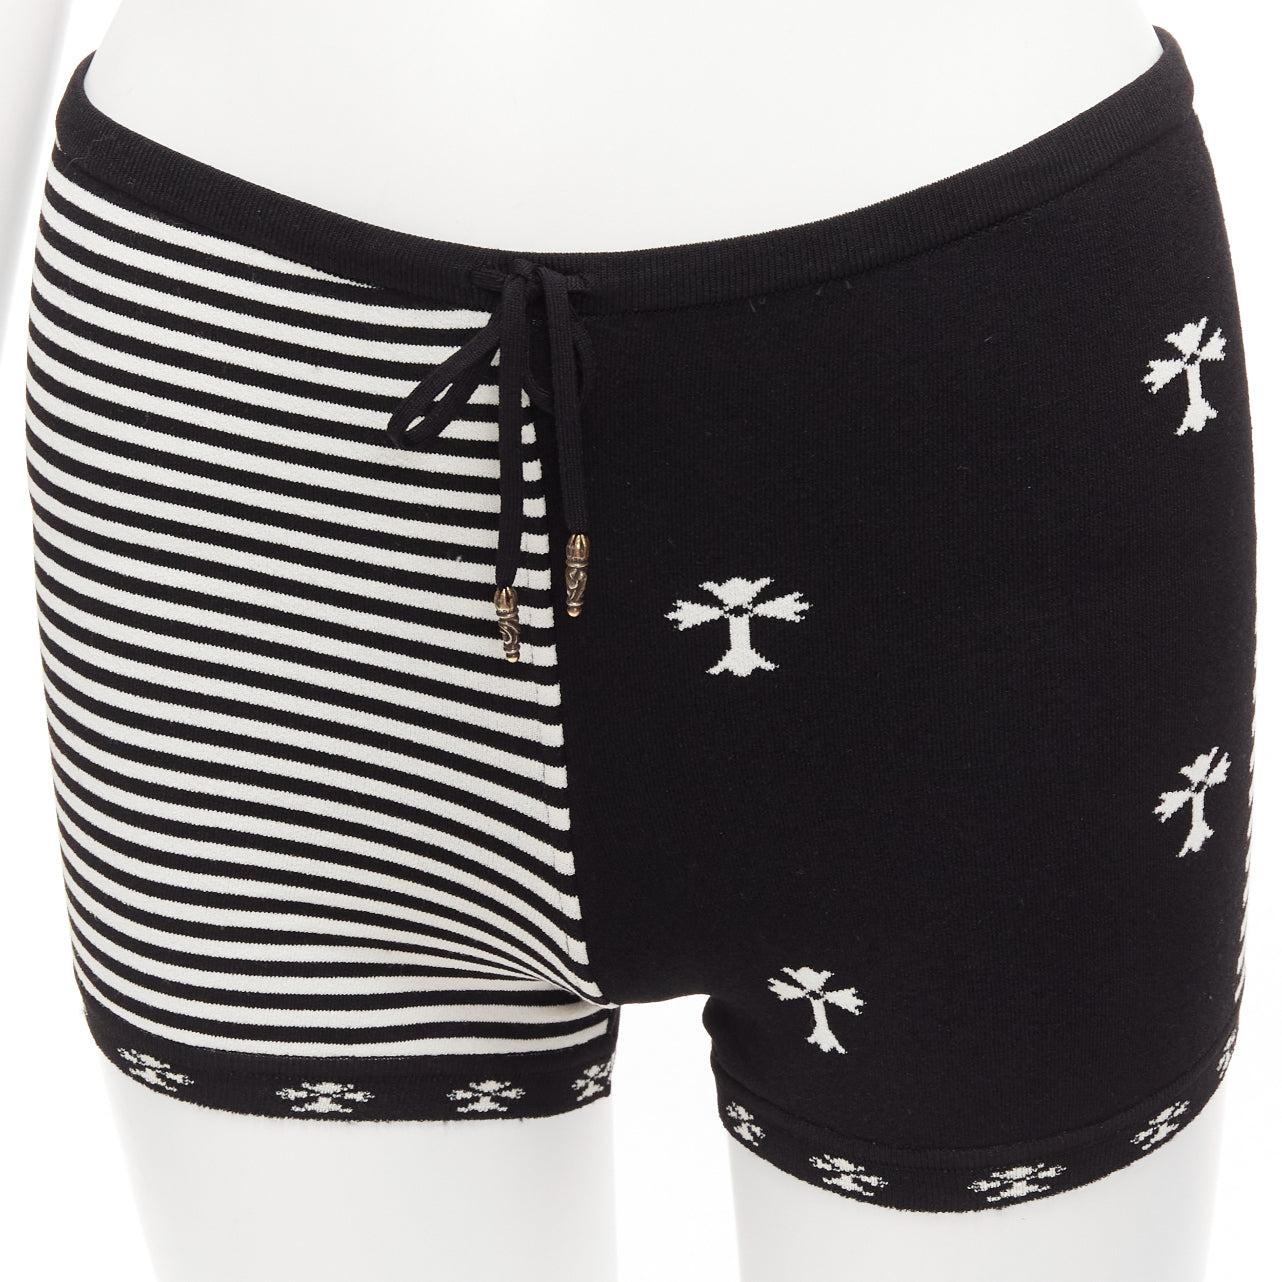 CHROME HEARTS black white cross silver bell knitted boy shorts XS
Reference: AAWC/A01160
Brand: Chrome Hearts
Material: Viscose, Blend
Color: Black, White
Pattern: Striped
Closure: Slip On
Made in: Italy

CONDITION:
Condition: Very good, this item